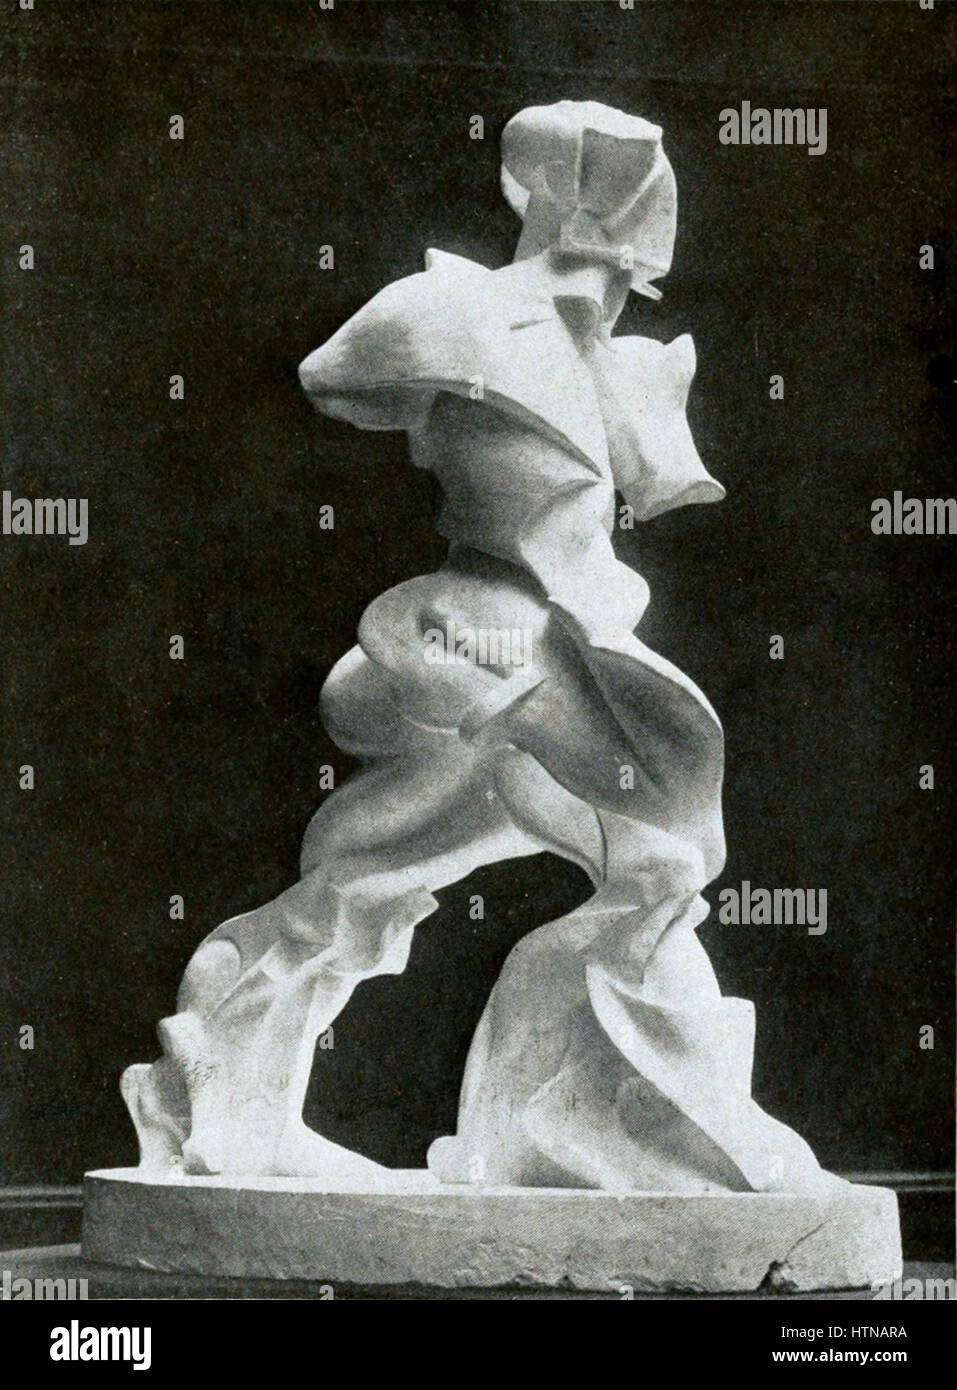 Umberto Boccioni, Spiral Expansion of Muscles in Action, plaster, photograph published in 1914 Stock Photo